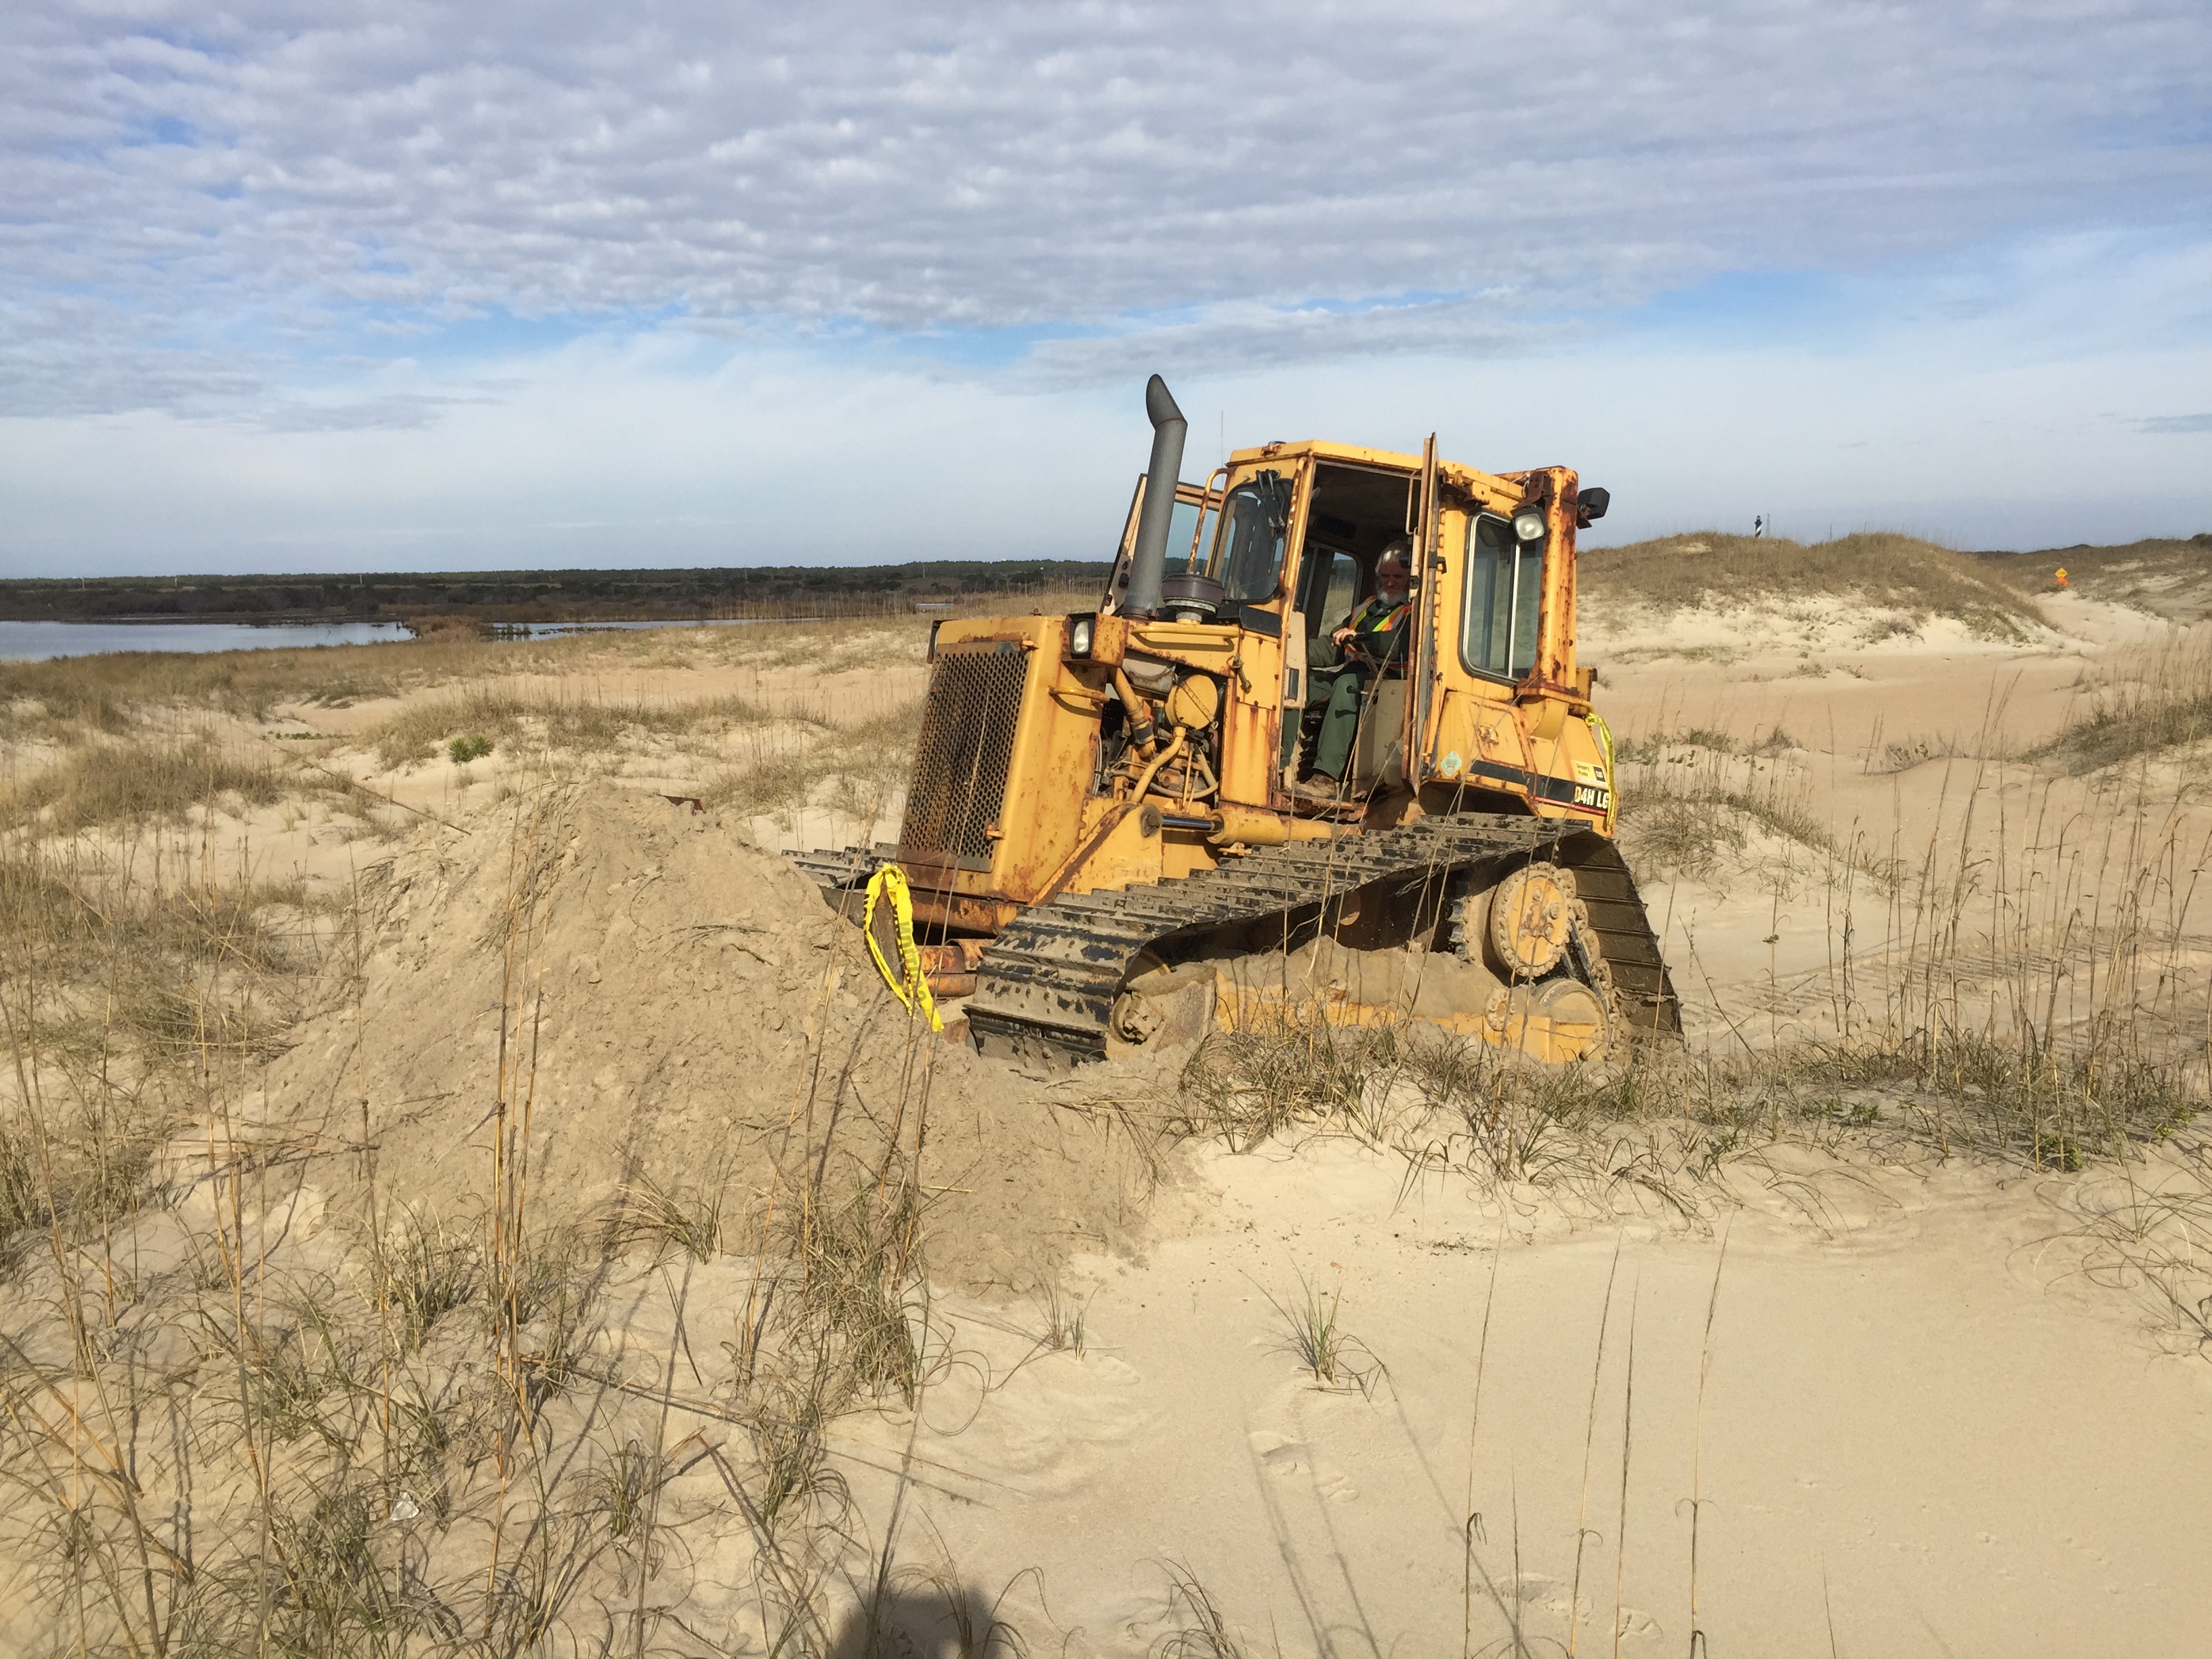 Heavy equipment operator beginning work on Cape Point bypass. Cape Hatteras Lighthouse in background.